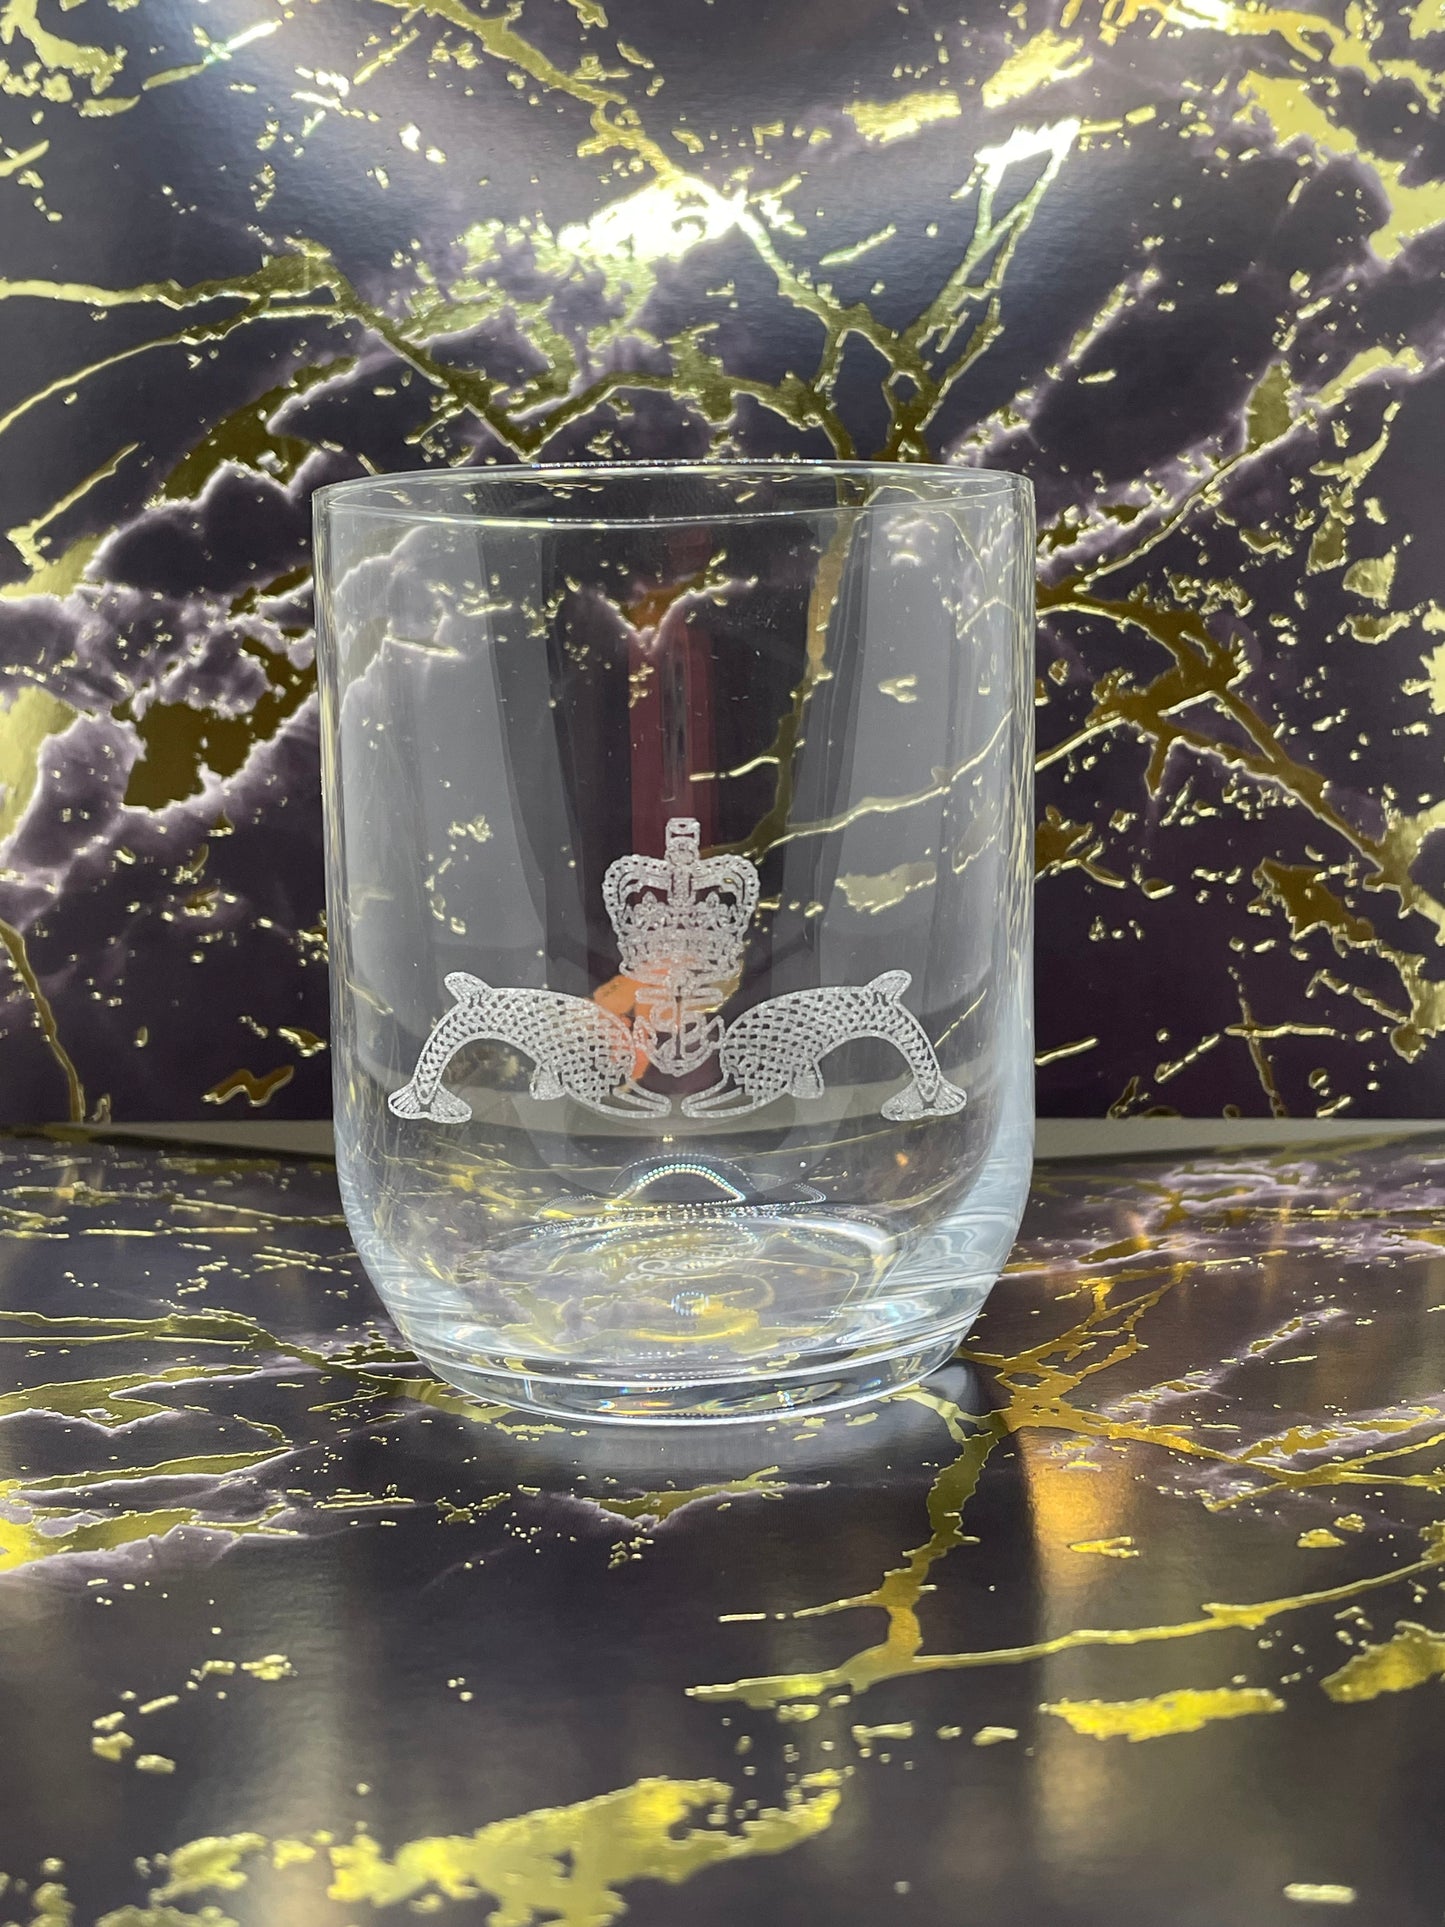 Submariner Dolphins Glass (1, 2 or 4)